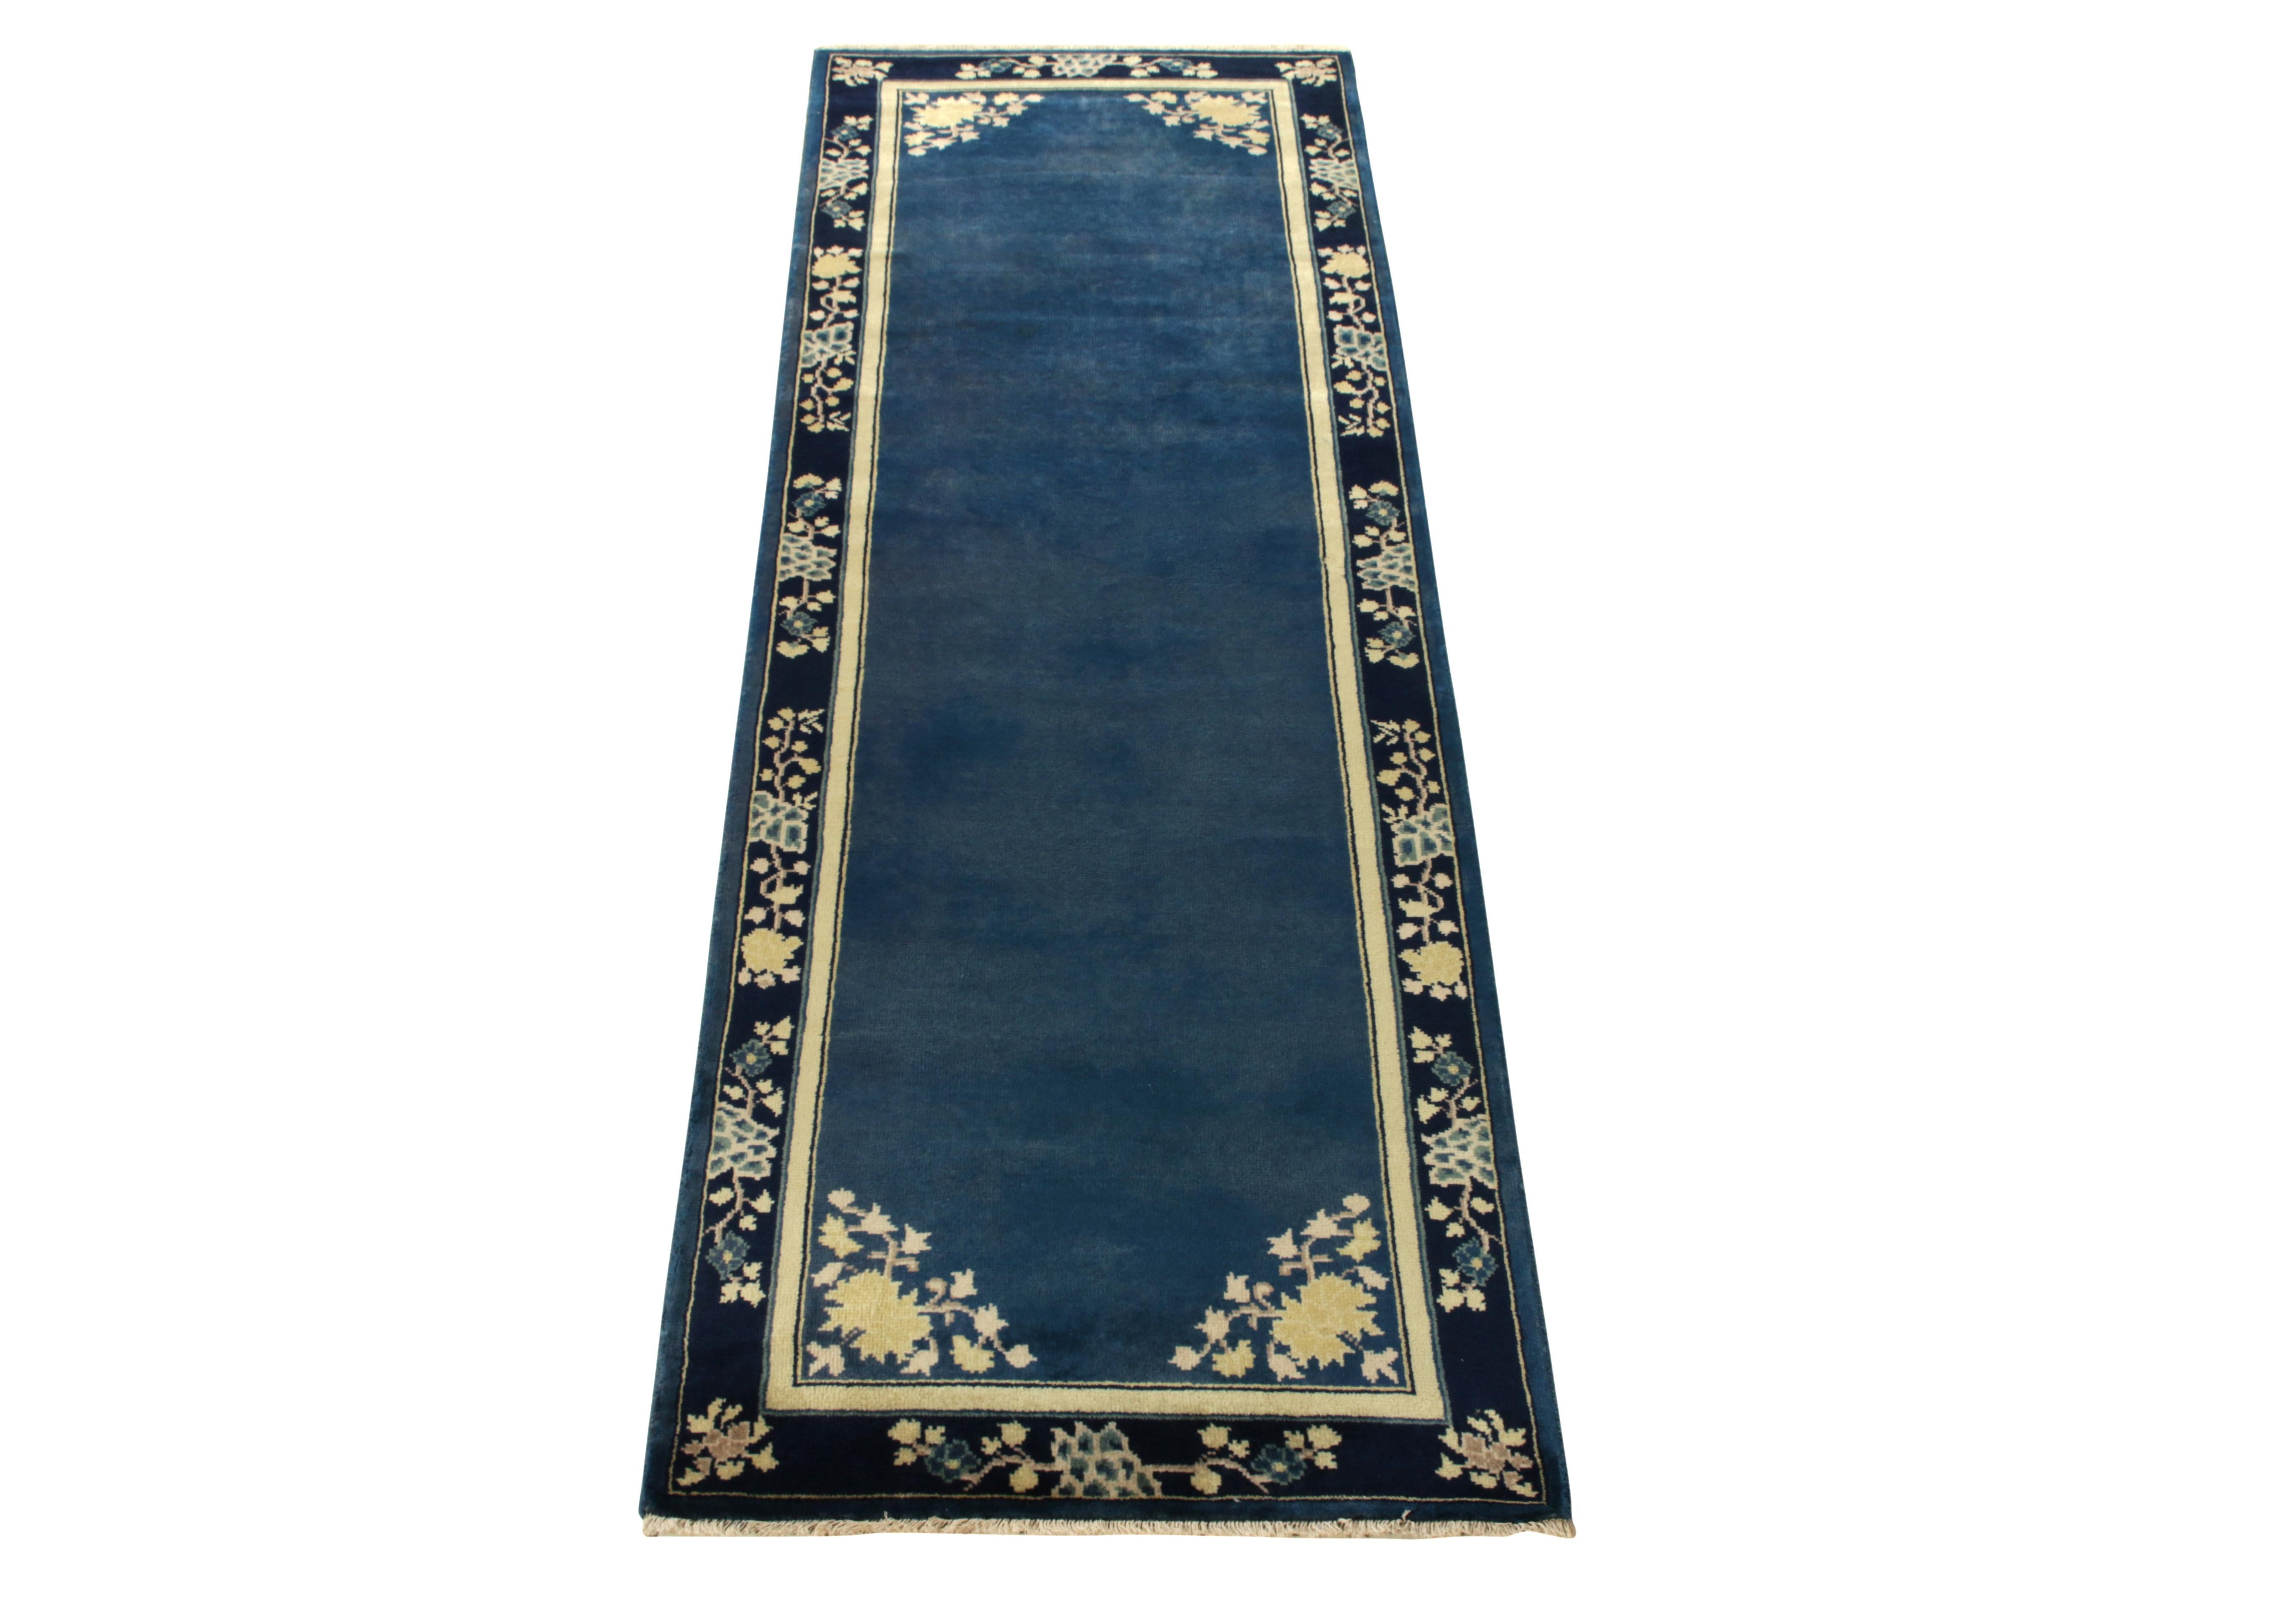 A 3x8 handknotted piece connoting Chinese art deco sensibilities of the 1920s coming from Rug & Kilim’s Antique & Vintage collection. The clean blue open field enjoys light dark spots for an interesting visual appeal on scale further exalted by off